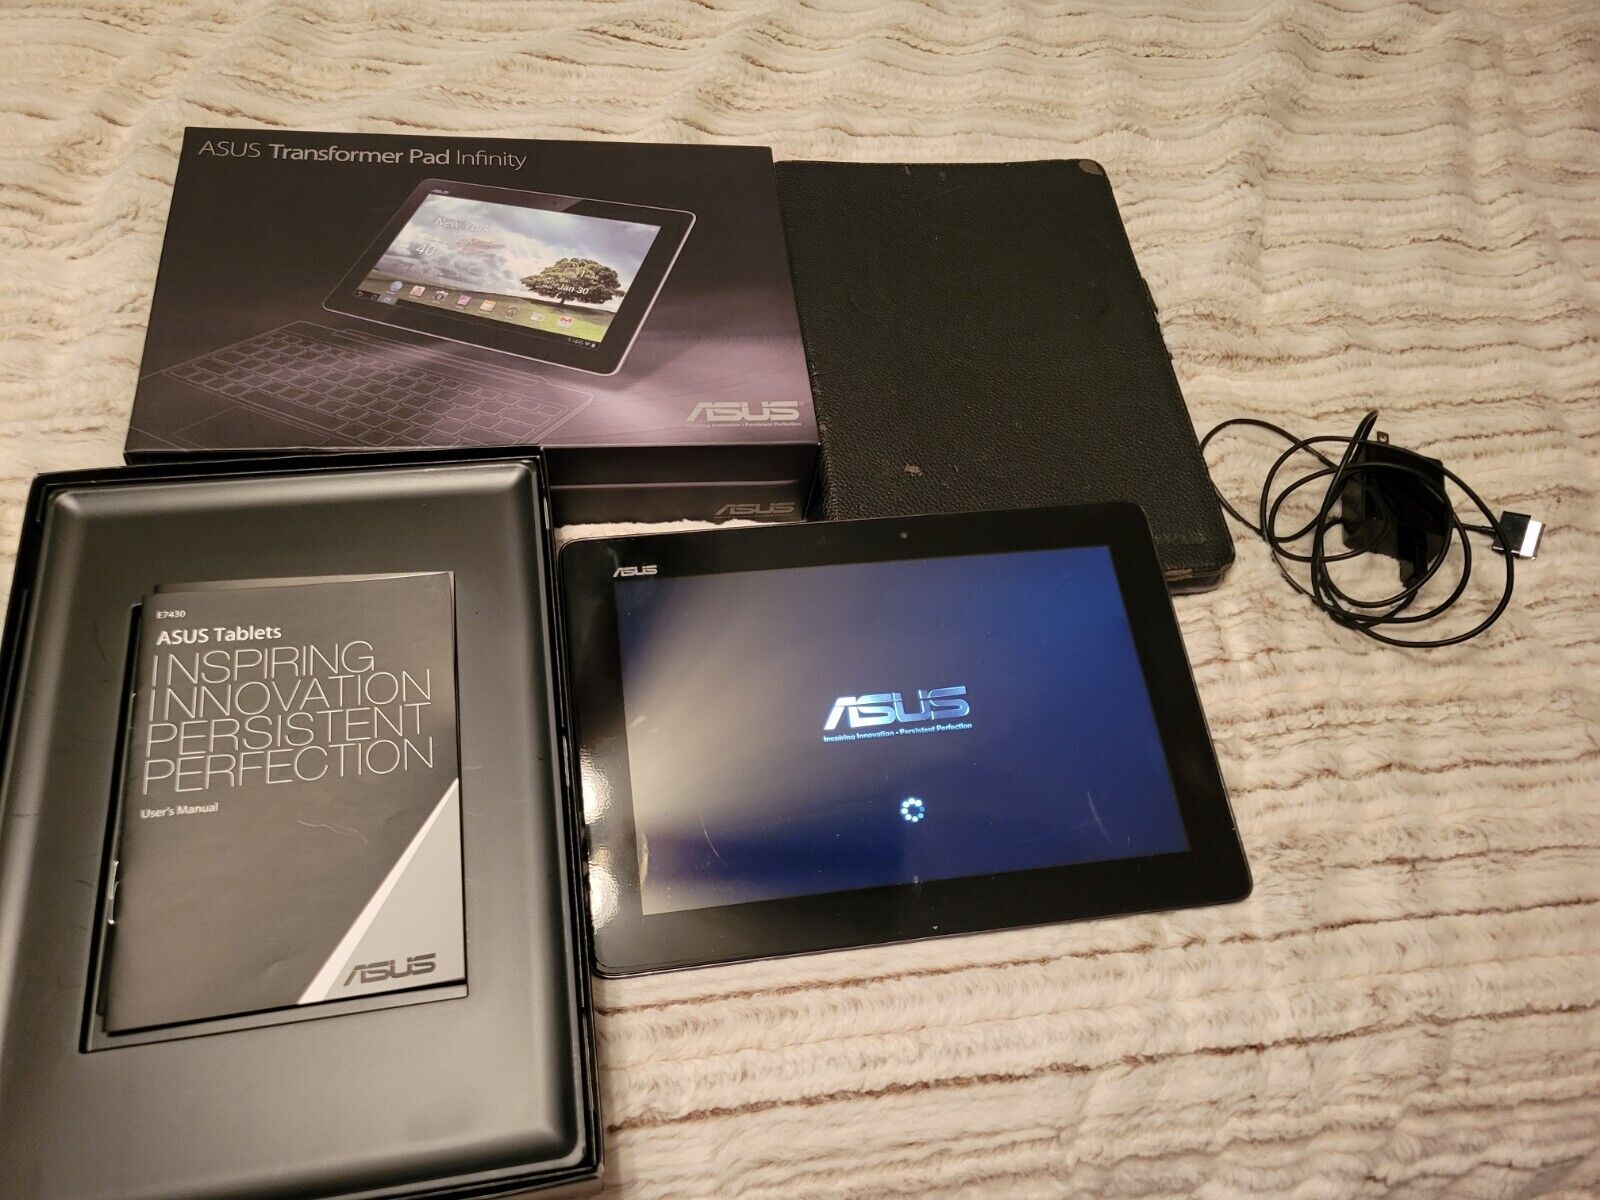 ASUS Transformer Pad Infinity TF700T 32GB, Wi-Fi, 10.1in Tested With Box